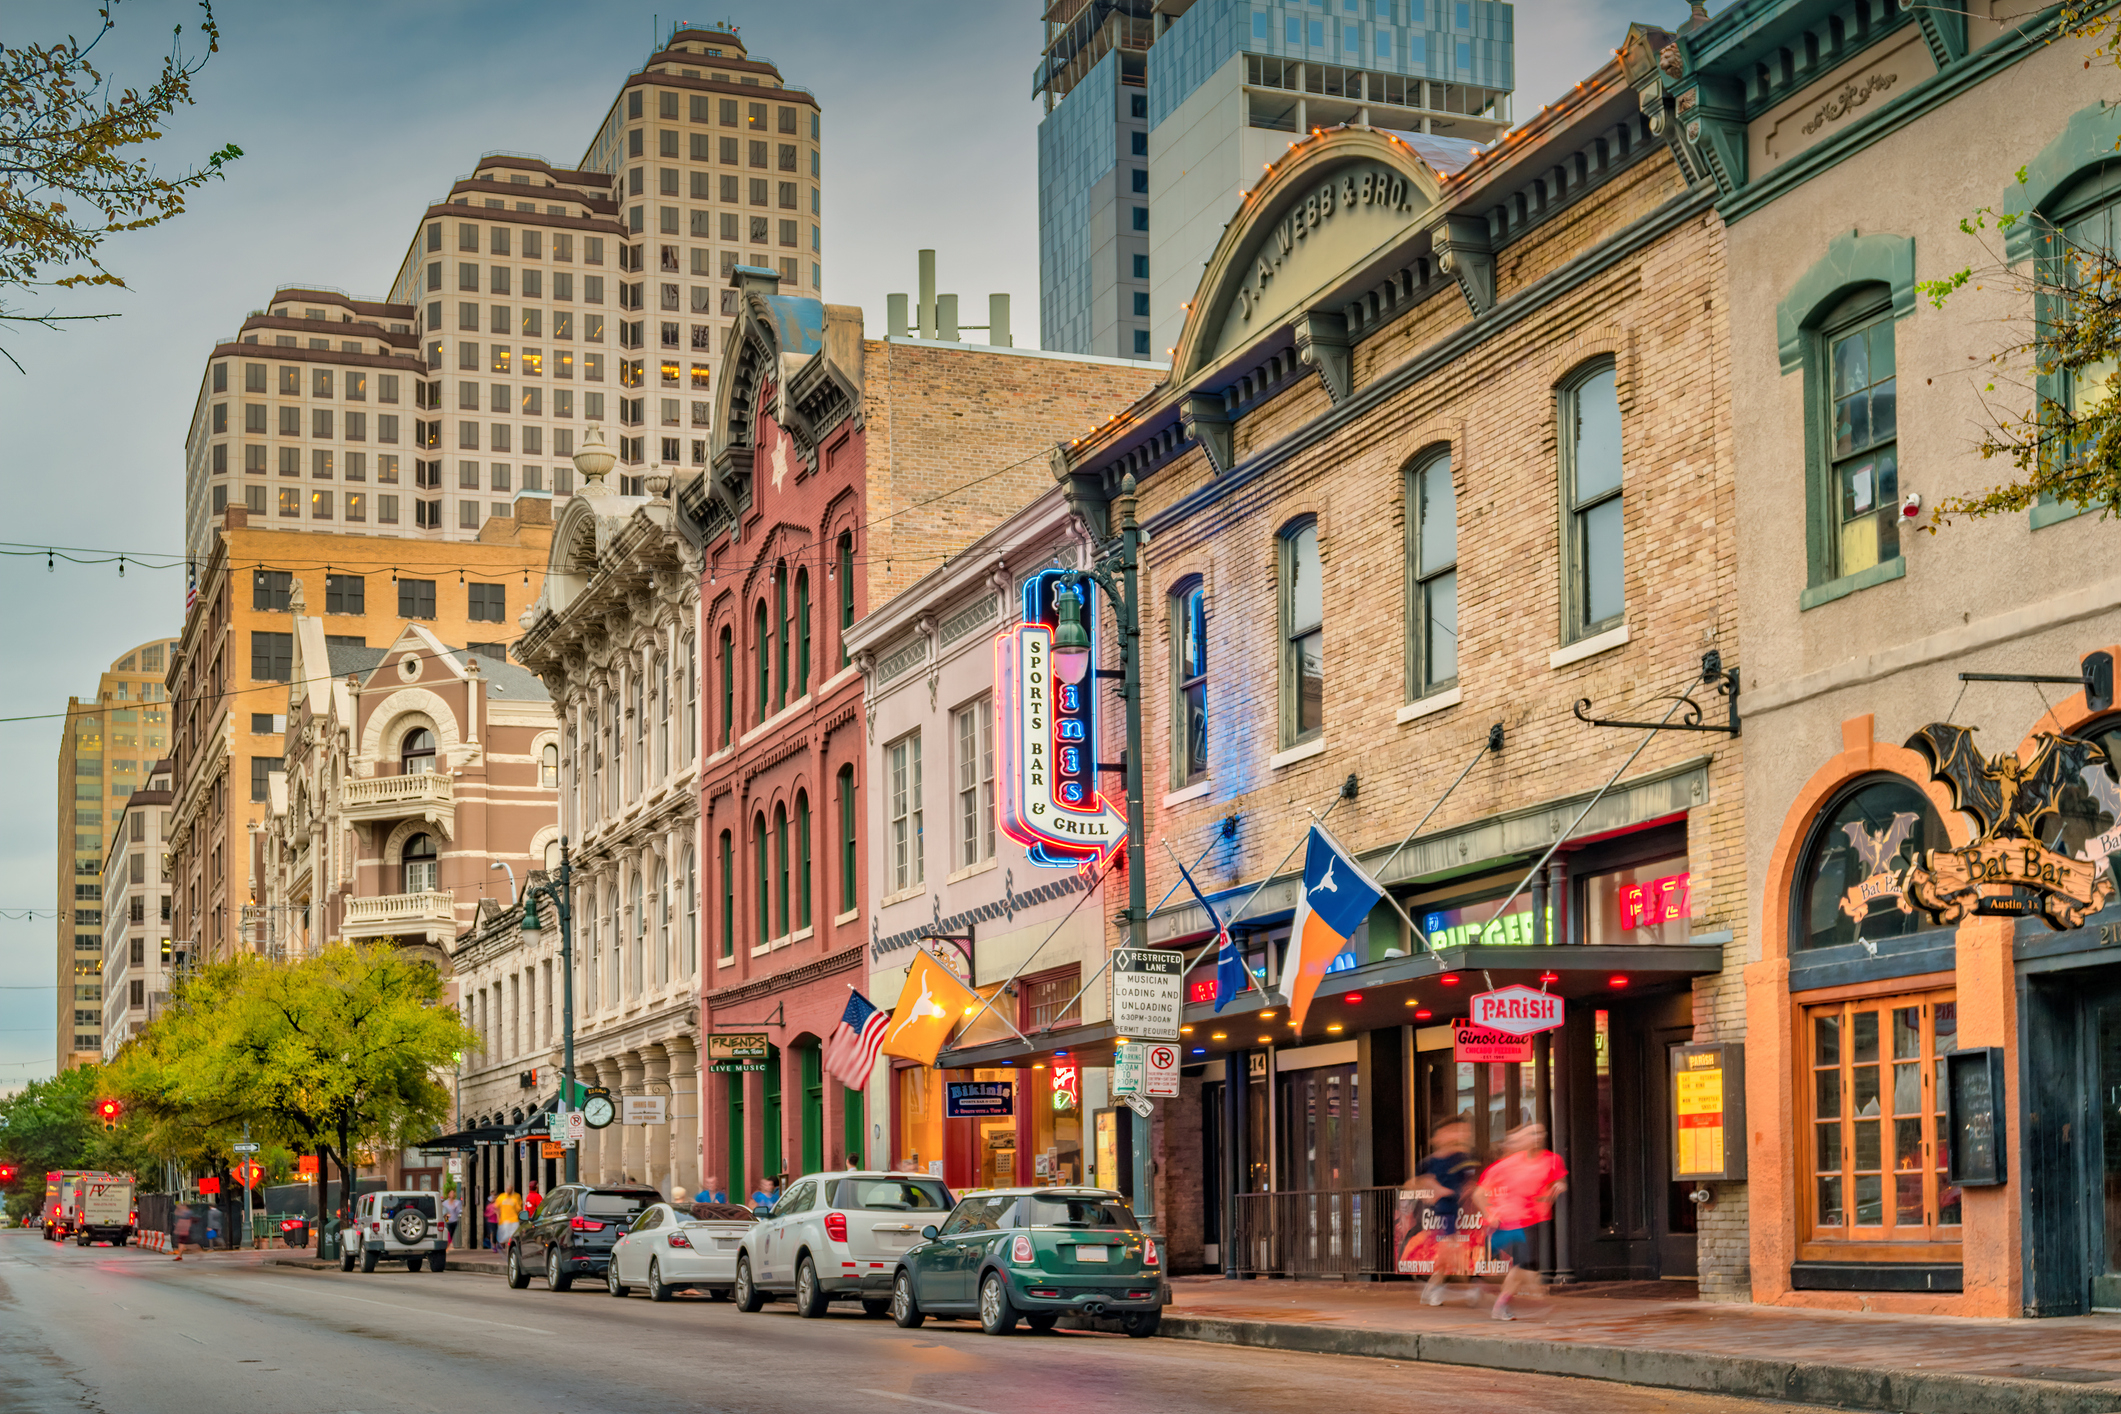 A view of Sixth Street in Austin, Texas